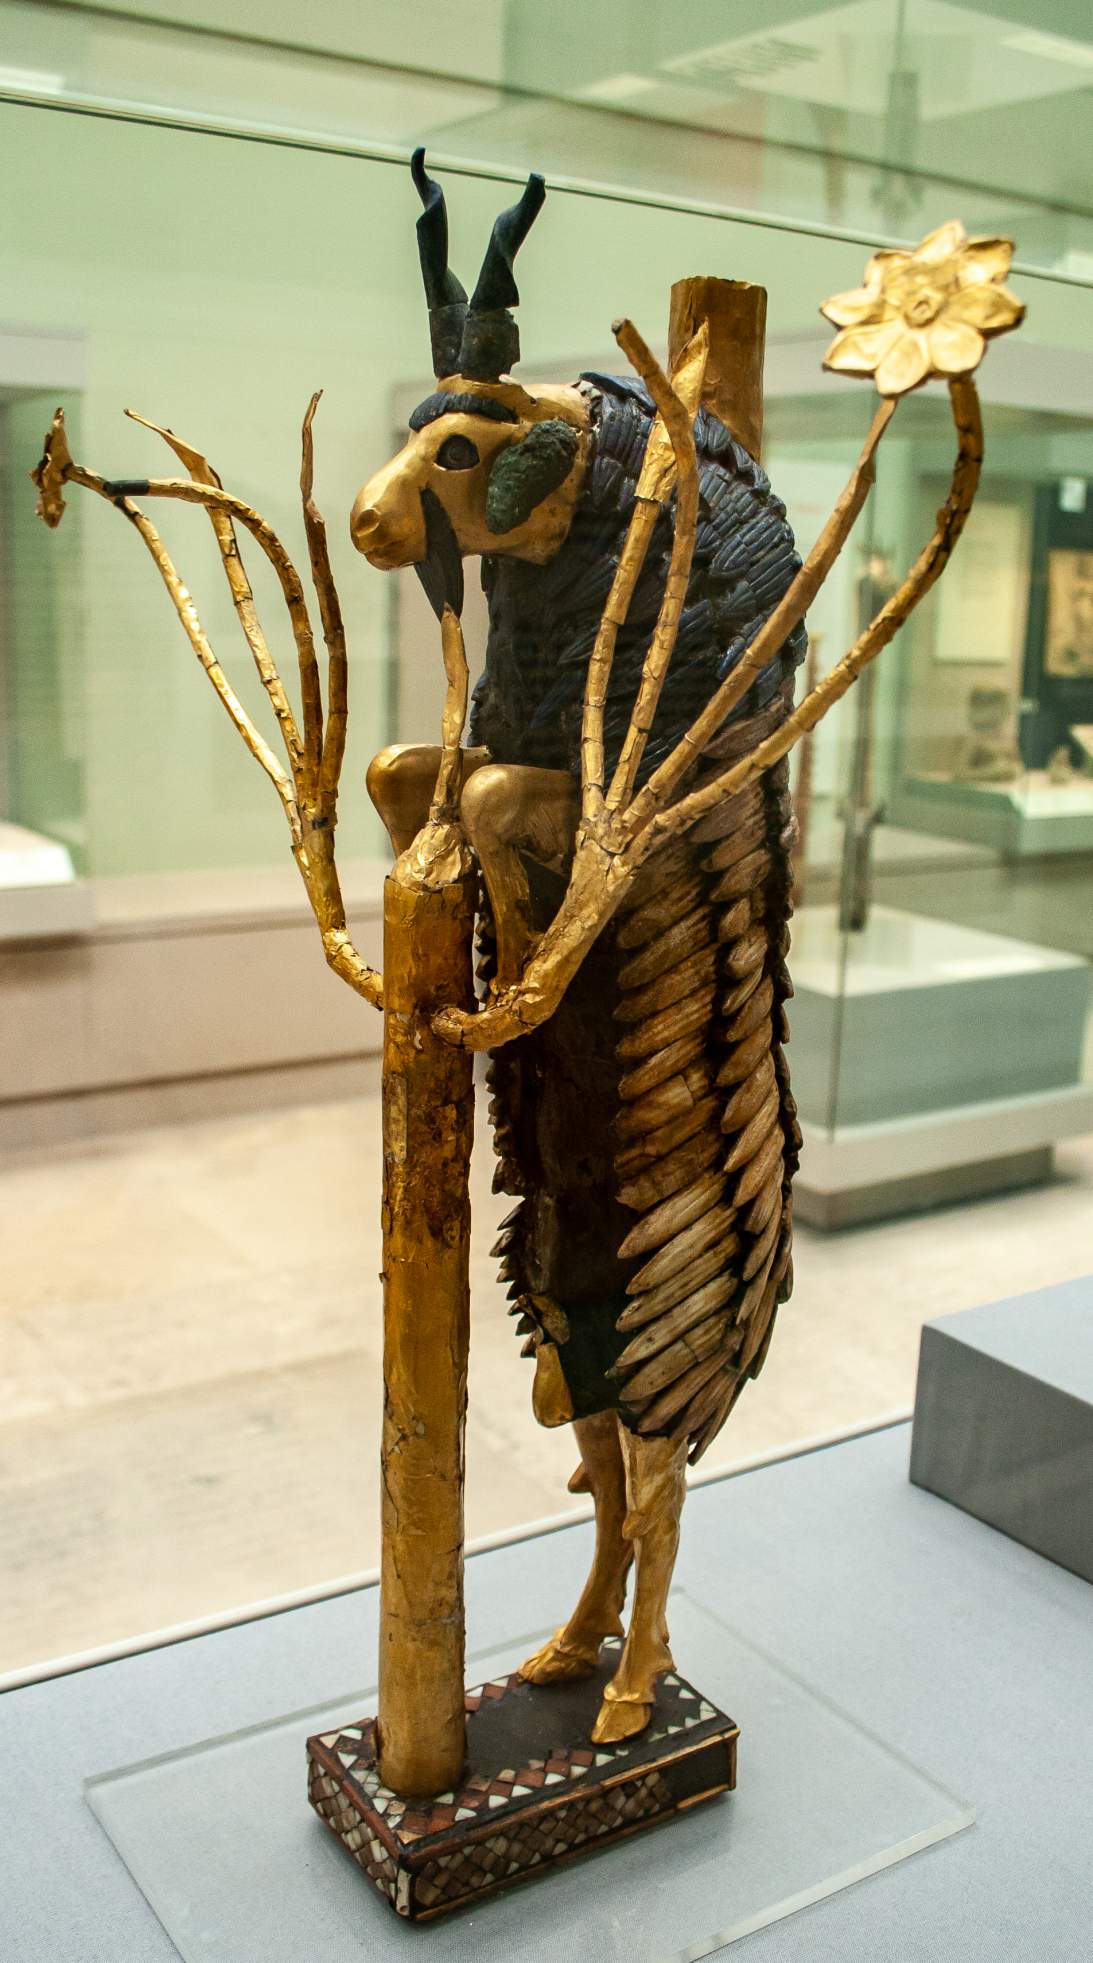 The Ram in a Thicket: The magnificent Mesopotamian Early Dynasty artifact 12